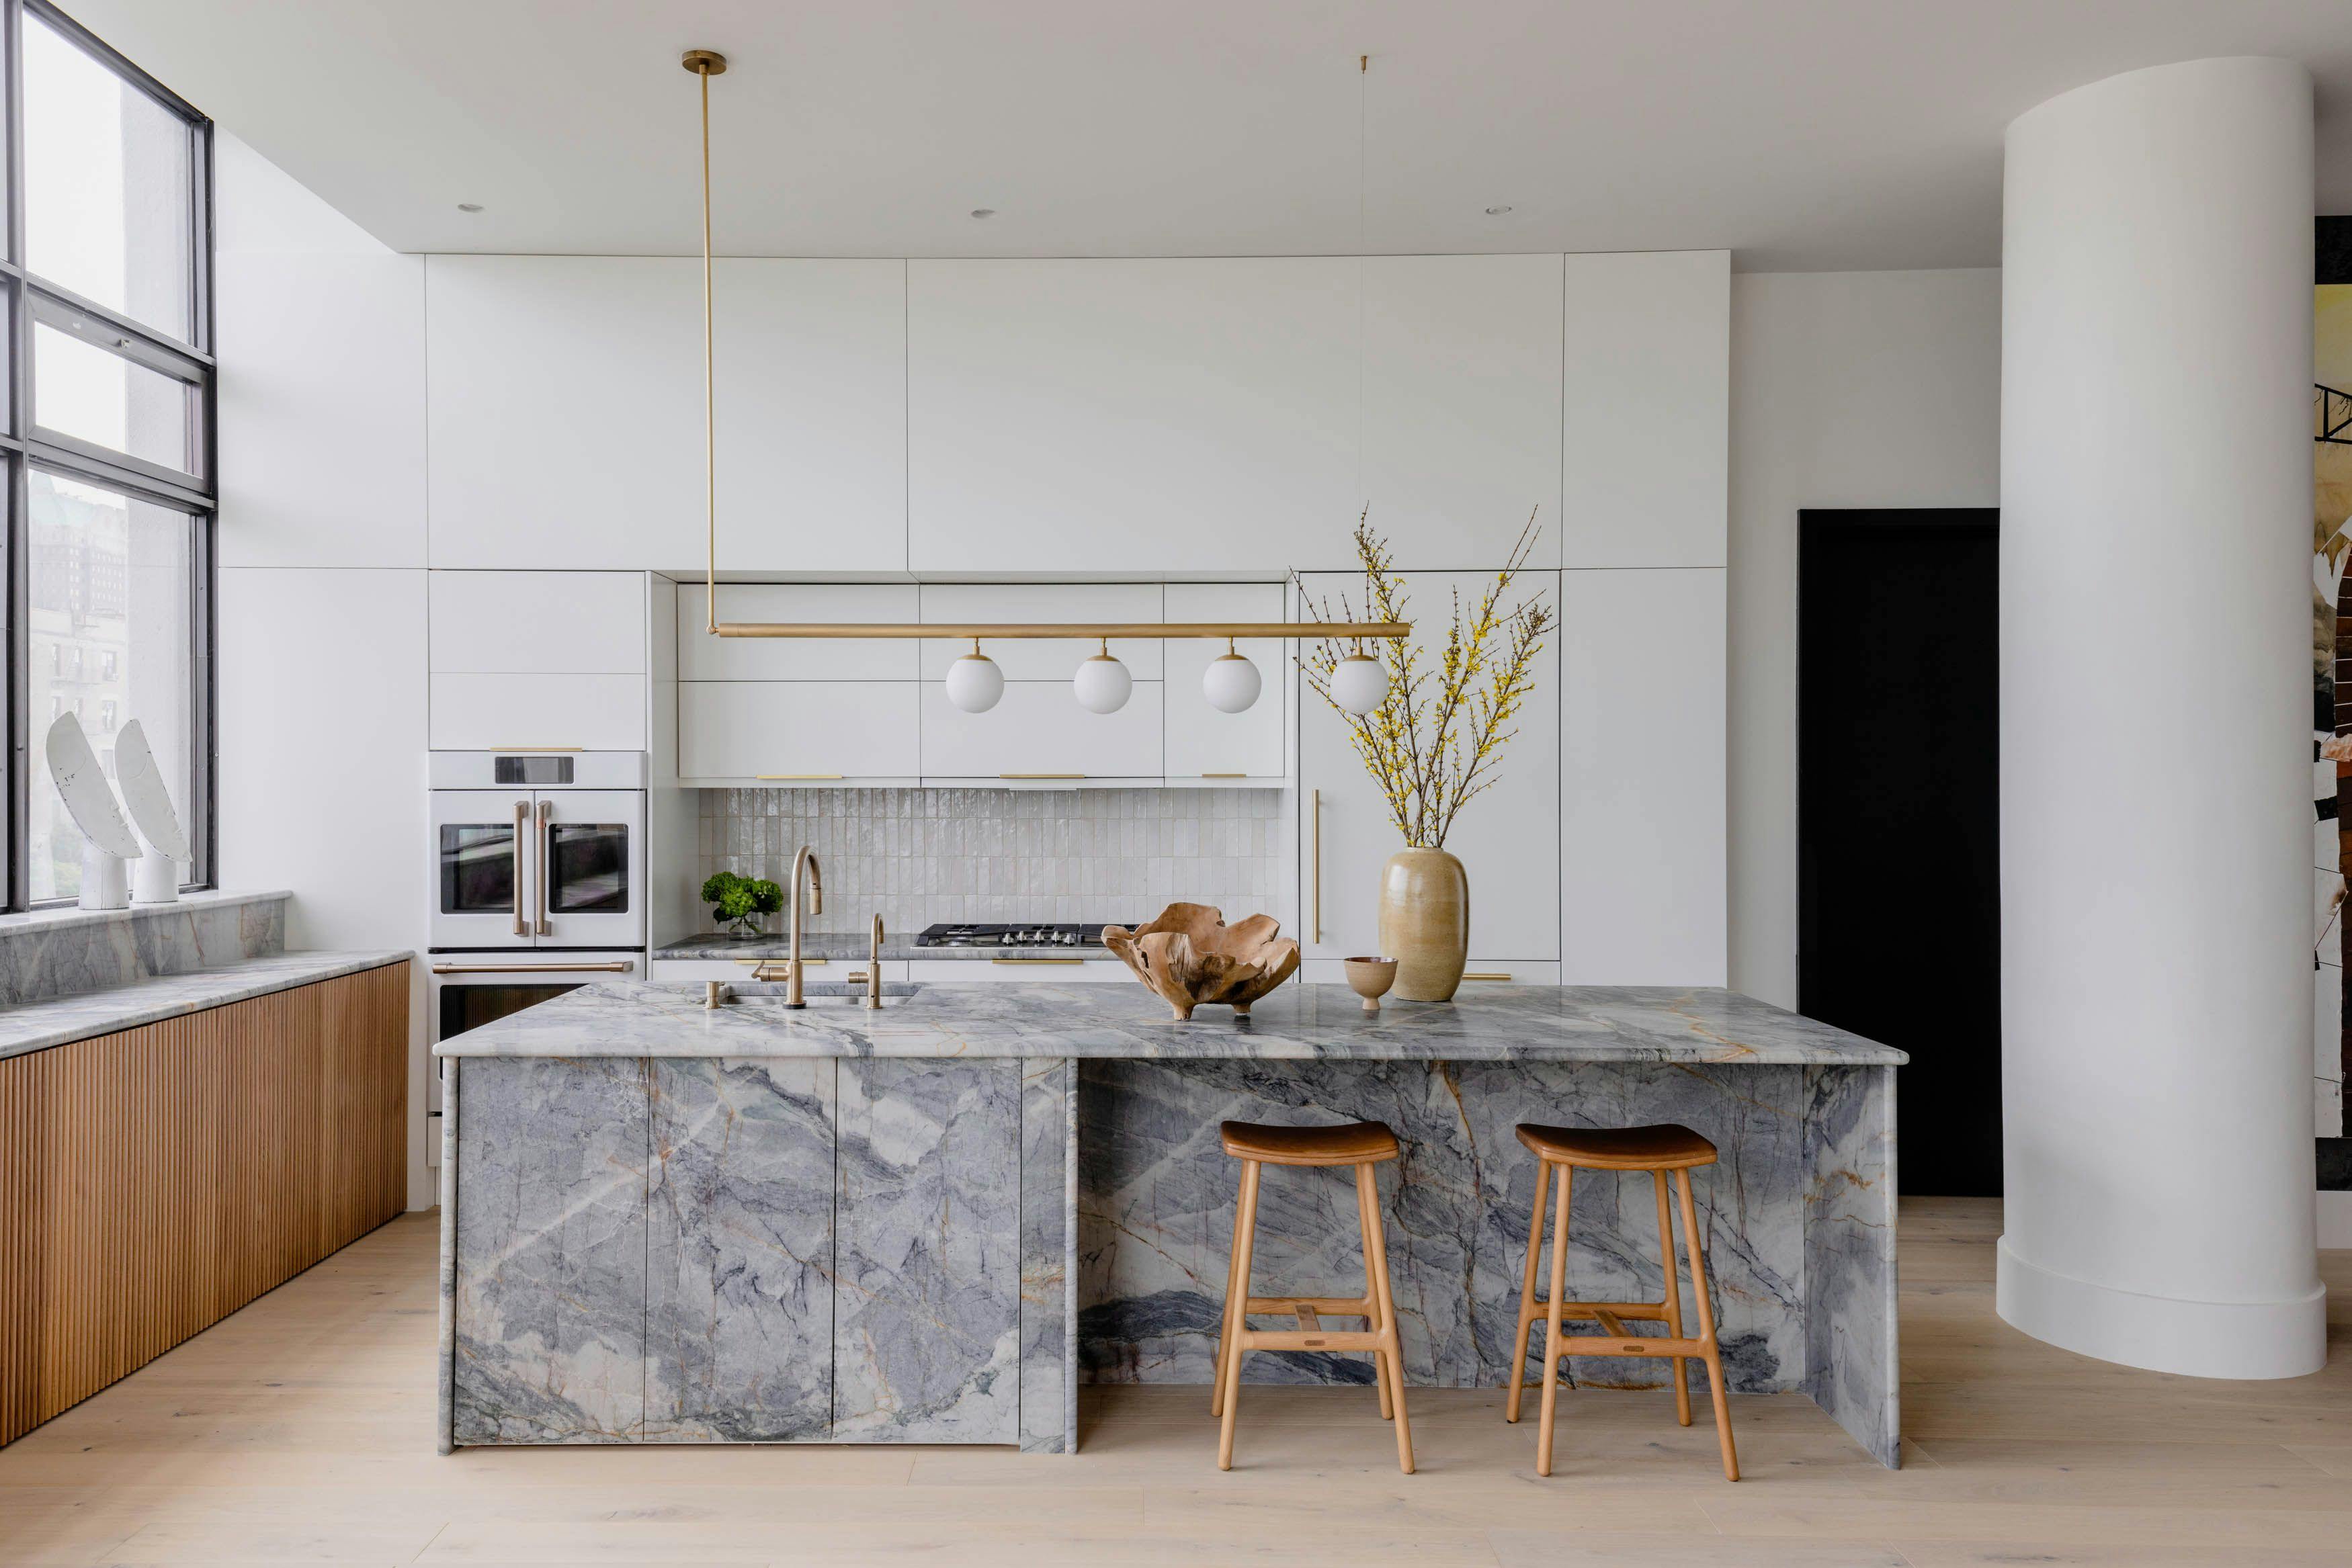 A modern space with minimalist design, warm wood accents, and a striking monolithic kitchen island.